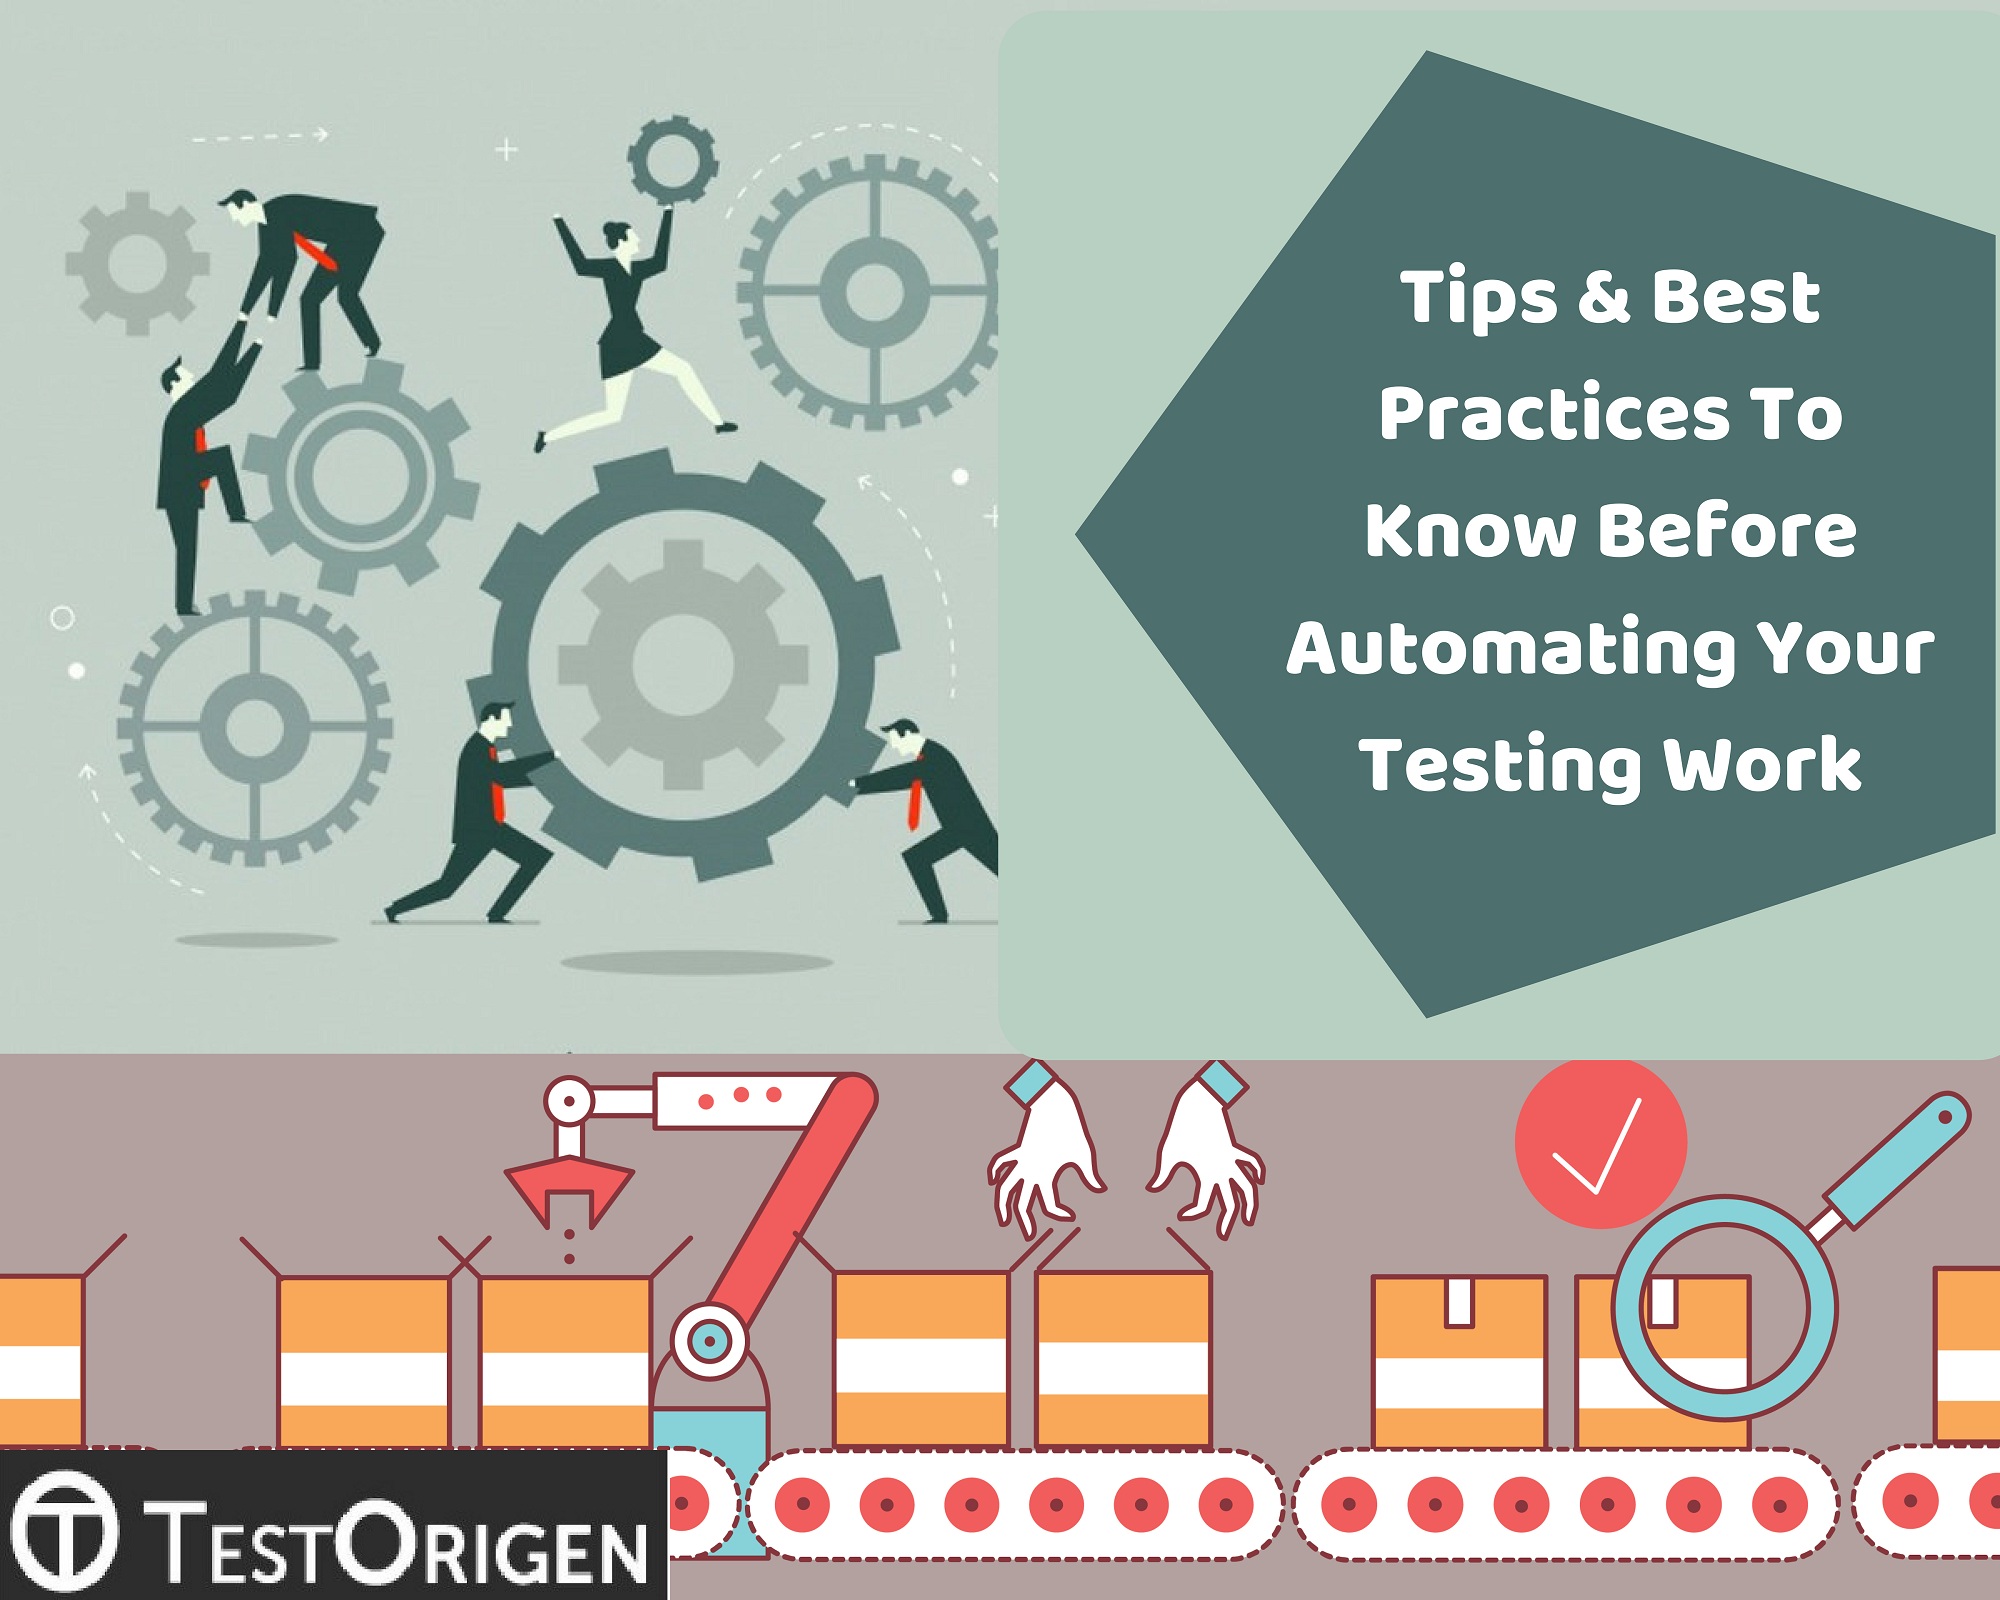 Tips & Best Practices To Know Before Automating Your Testing Work